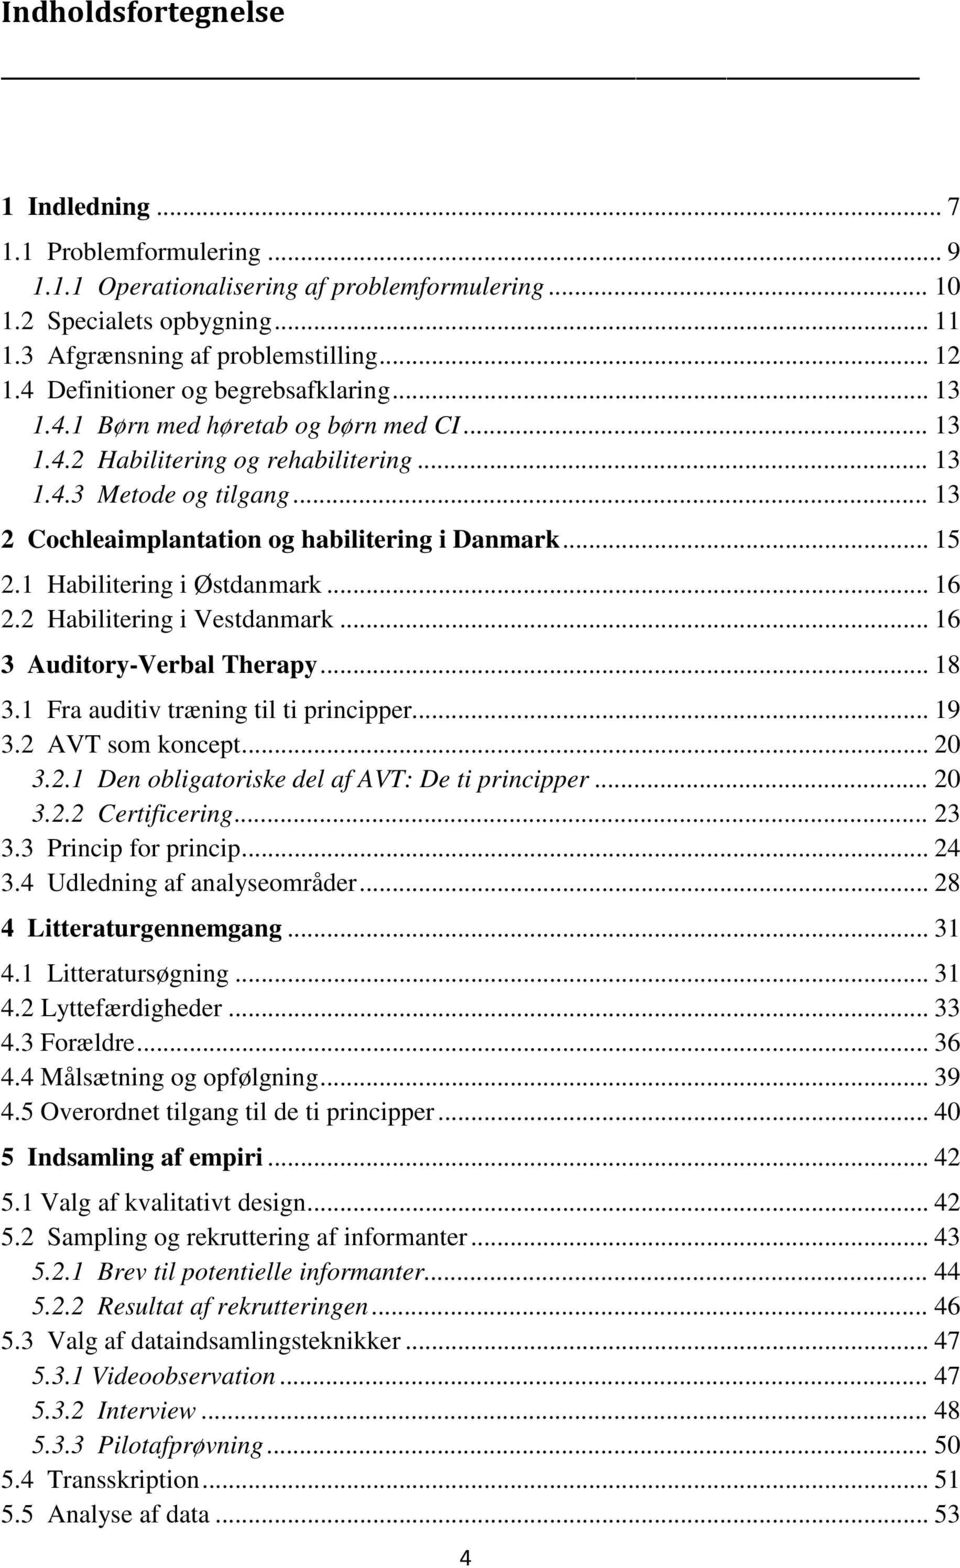 .. 13 2 Cochleaimplantation og habilitering i Danmark... 15 2.1 Habilitering i Østdanmark... 16 2.2 Habilitering i Vestdanmark... 16 3 Auditory-Verbal Therapy... 18 3.